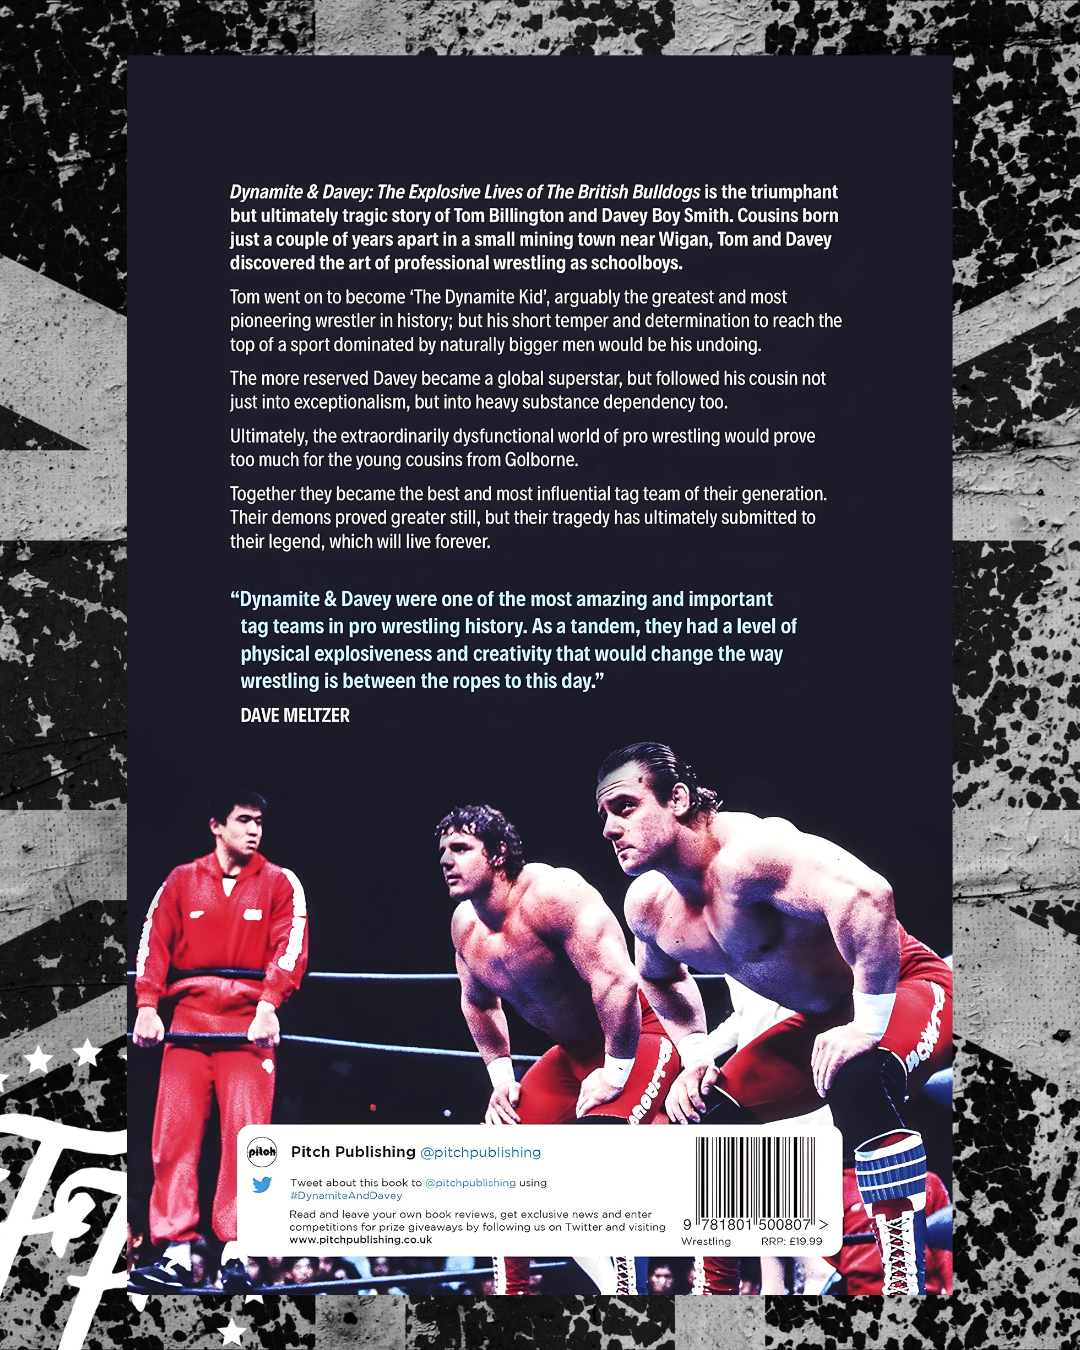 Dynamite and Davey: The Explosive Lives of the British Bulldogs by Steven Bell